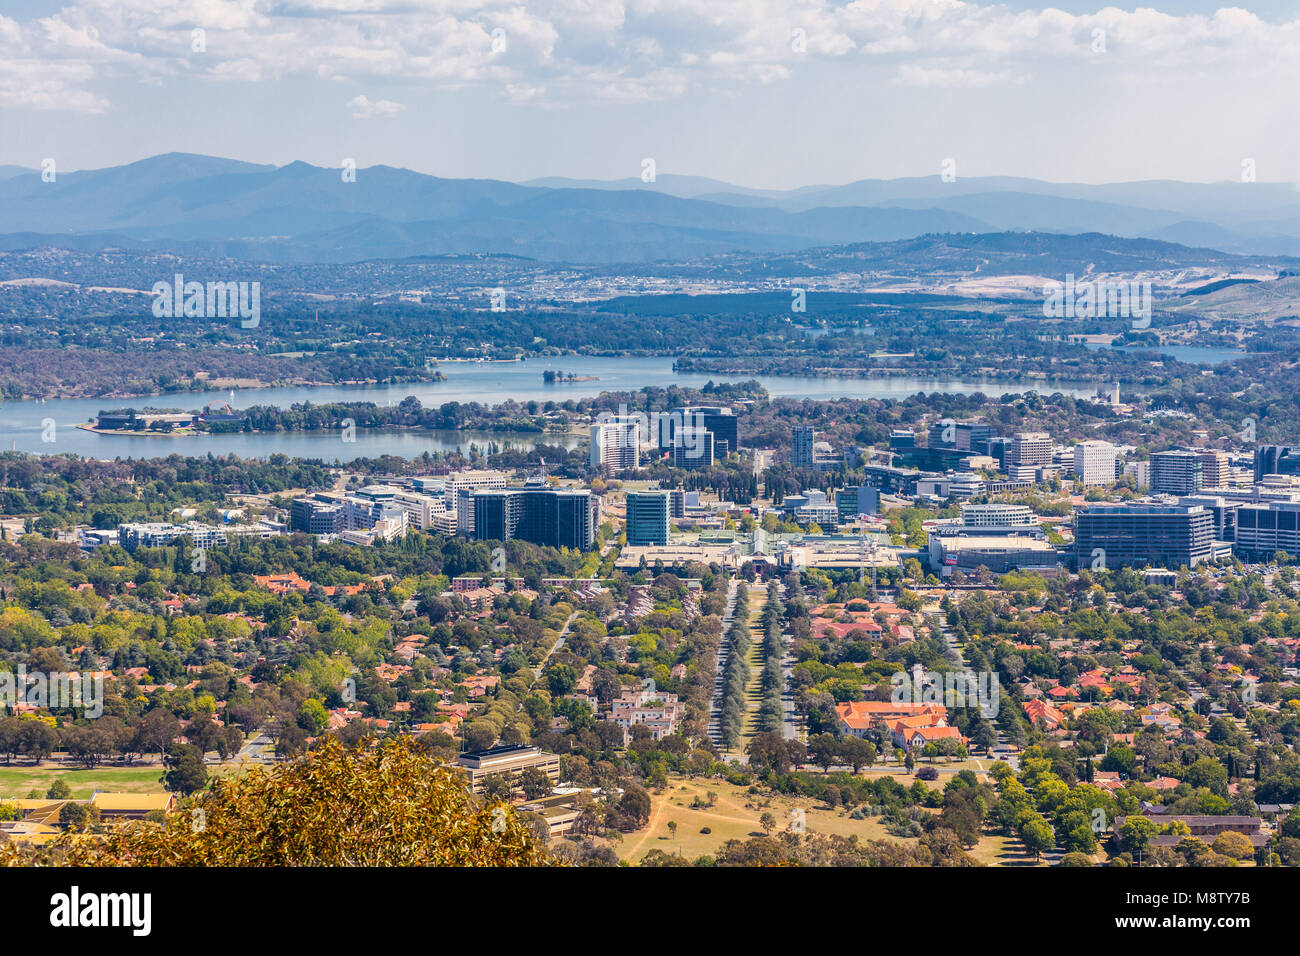 View of Canberra city from Mt. Ainslie lookout on bright sunny day Stock Photo